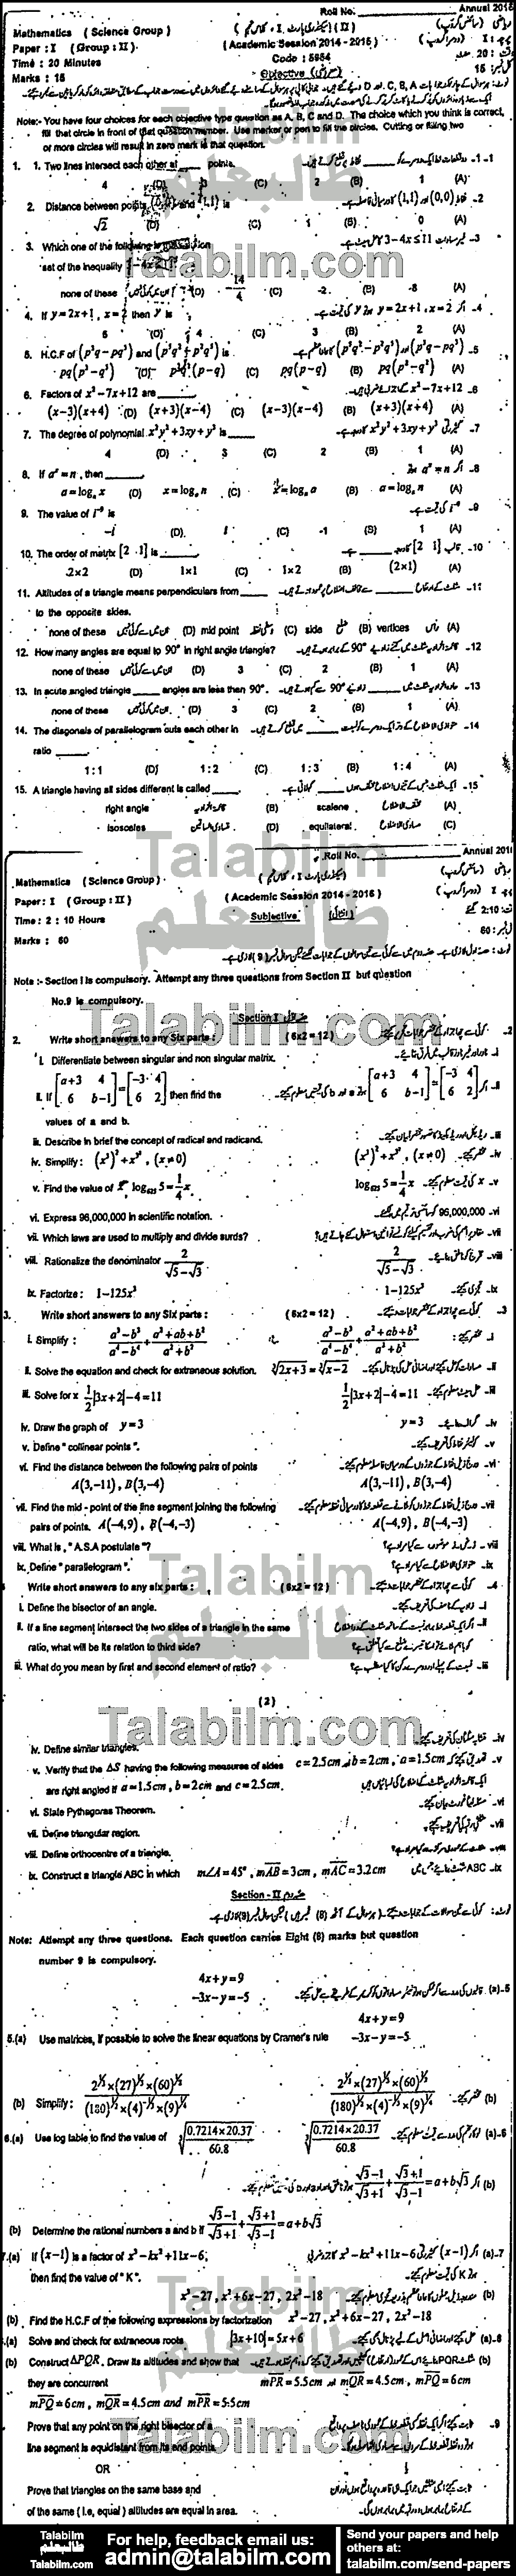 Math 0 past paper for 2015 Group-II